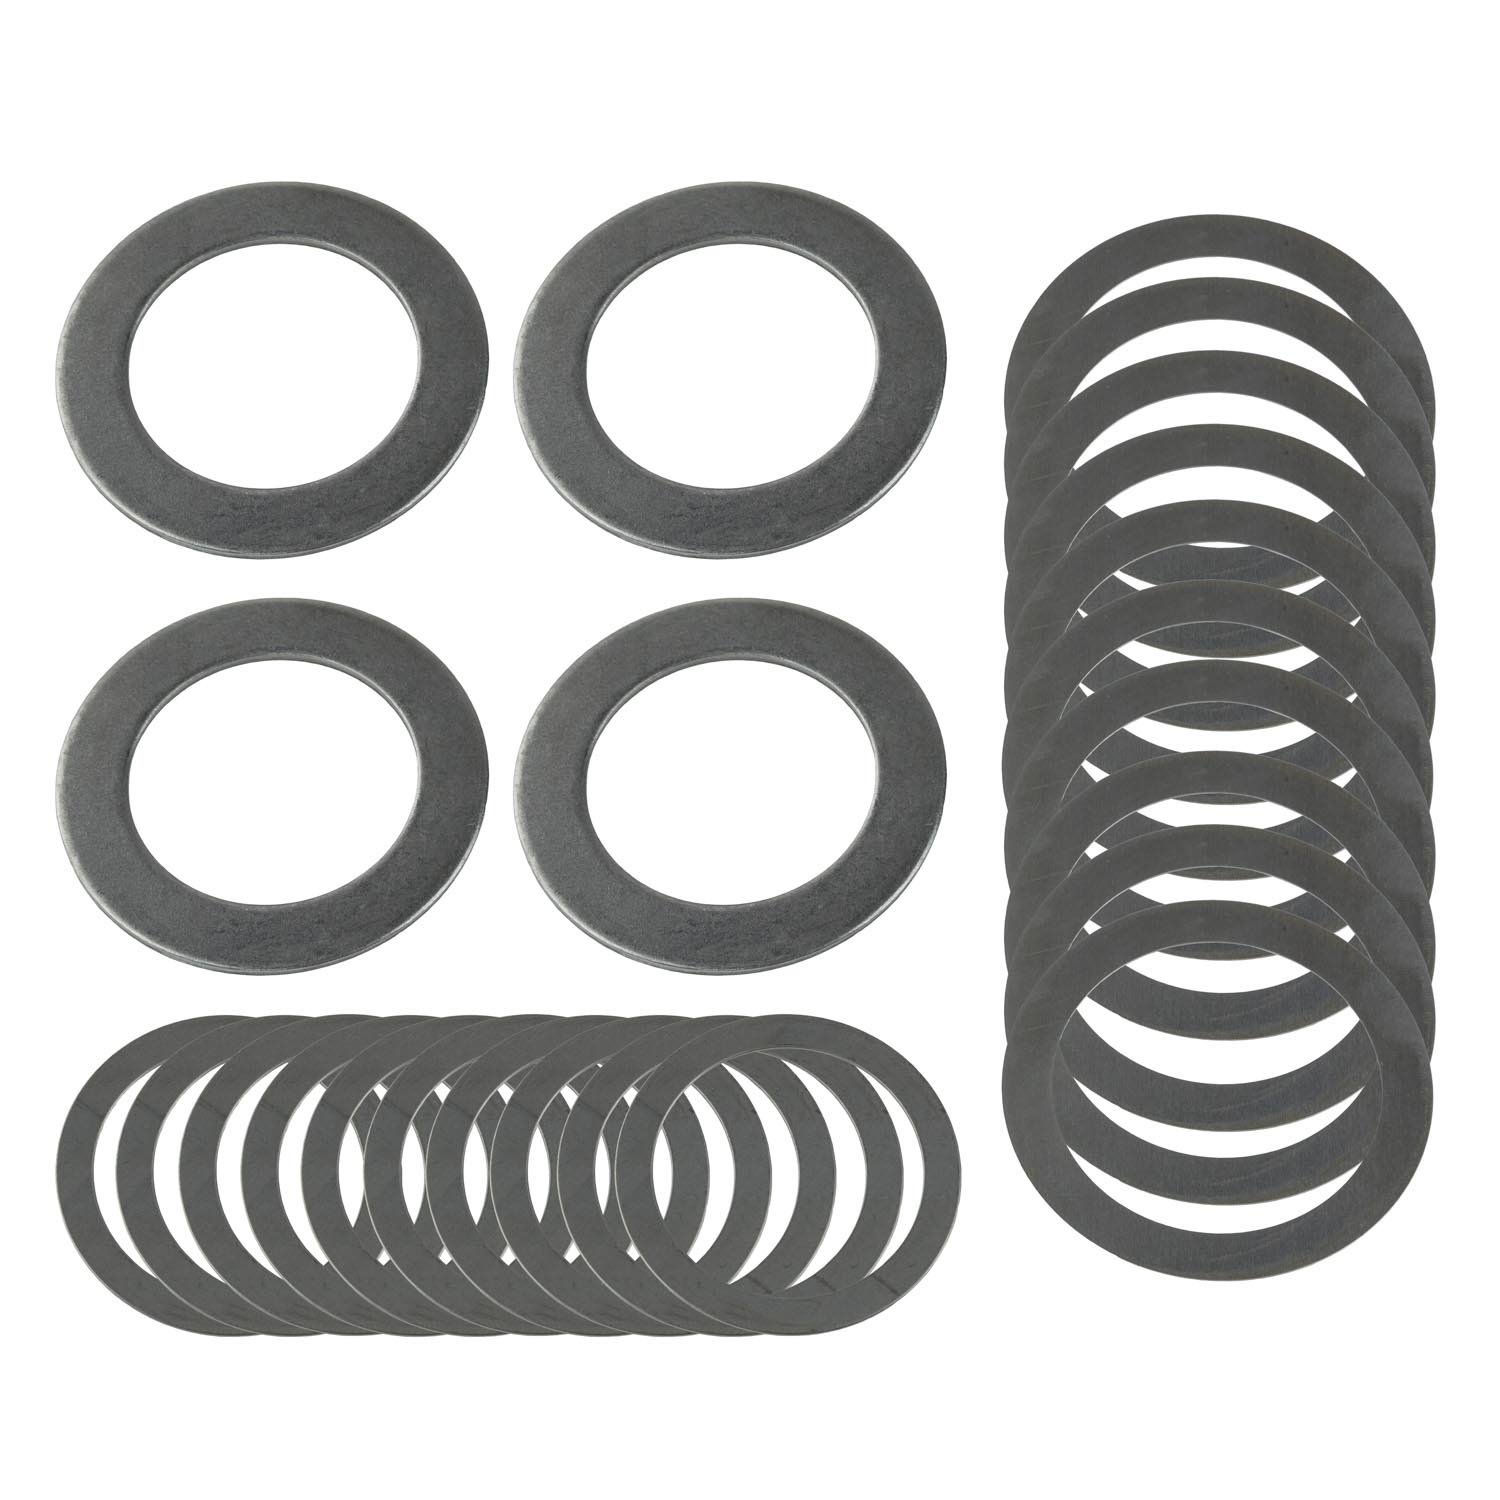 Carrier And Pinion Shim Kit for 1963-1979 Chevy